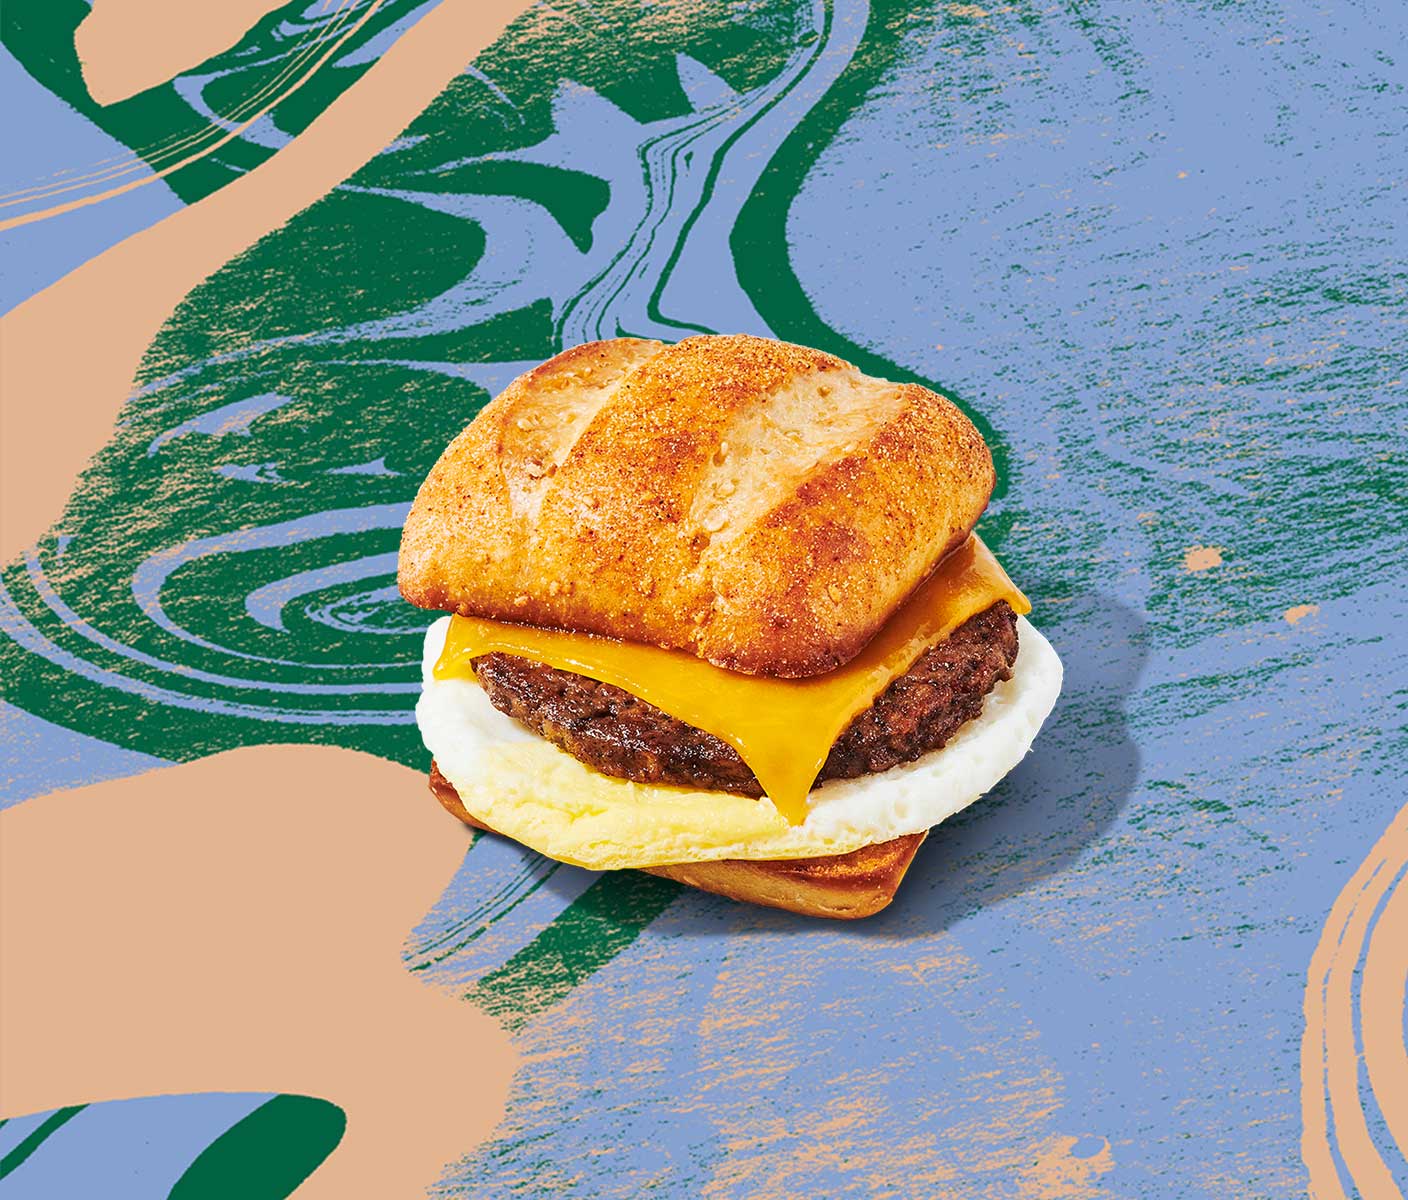 Meatless patty and slice of cheese between a ciabatta bun against a backdrop of swirly brushstrokes.